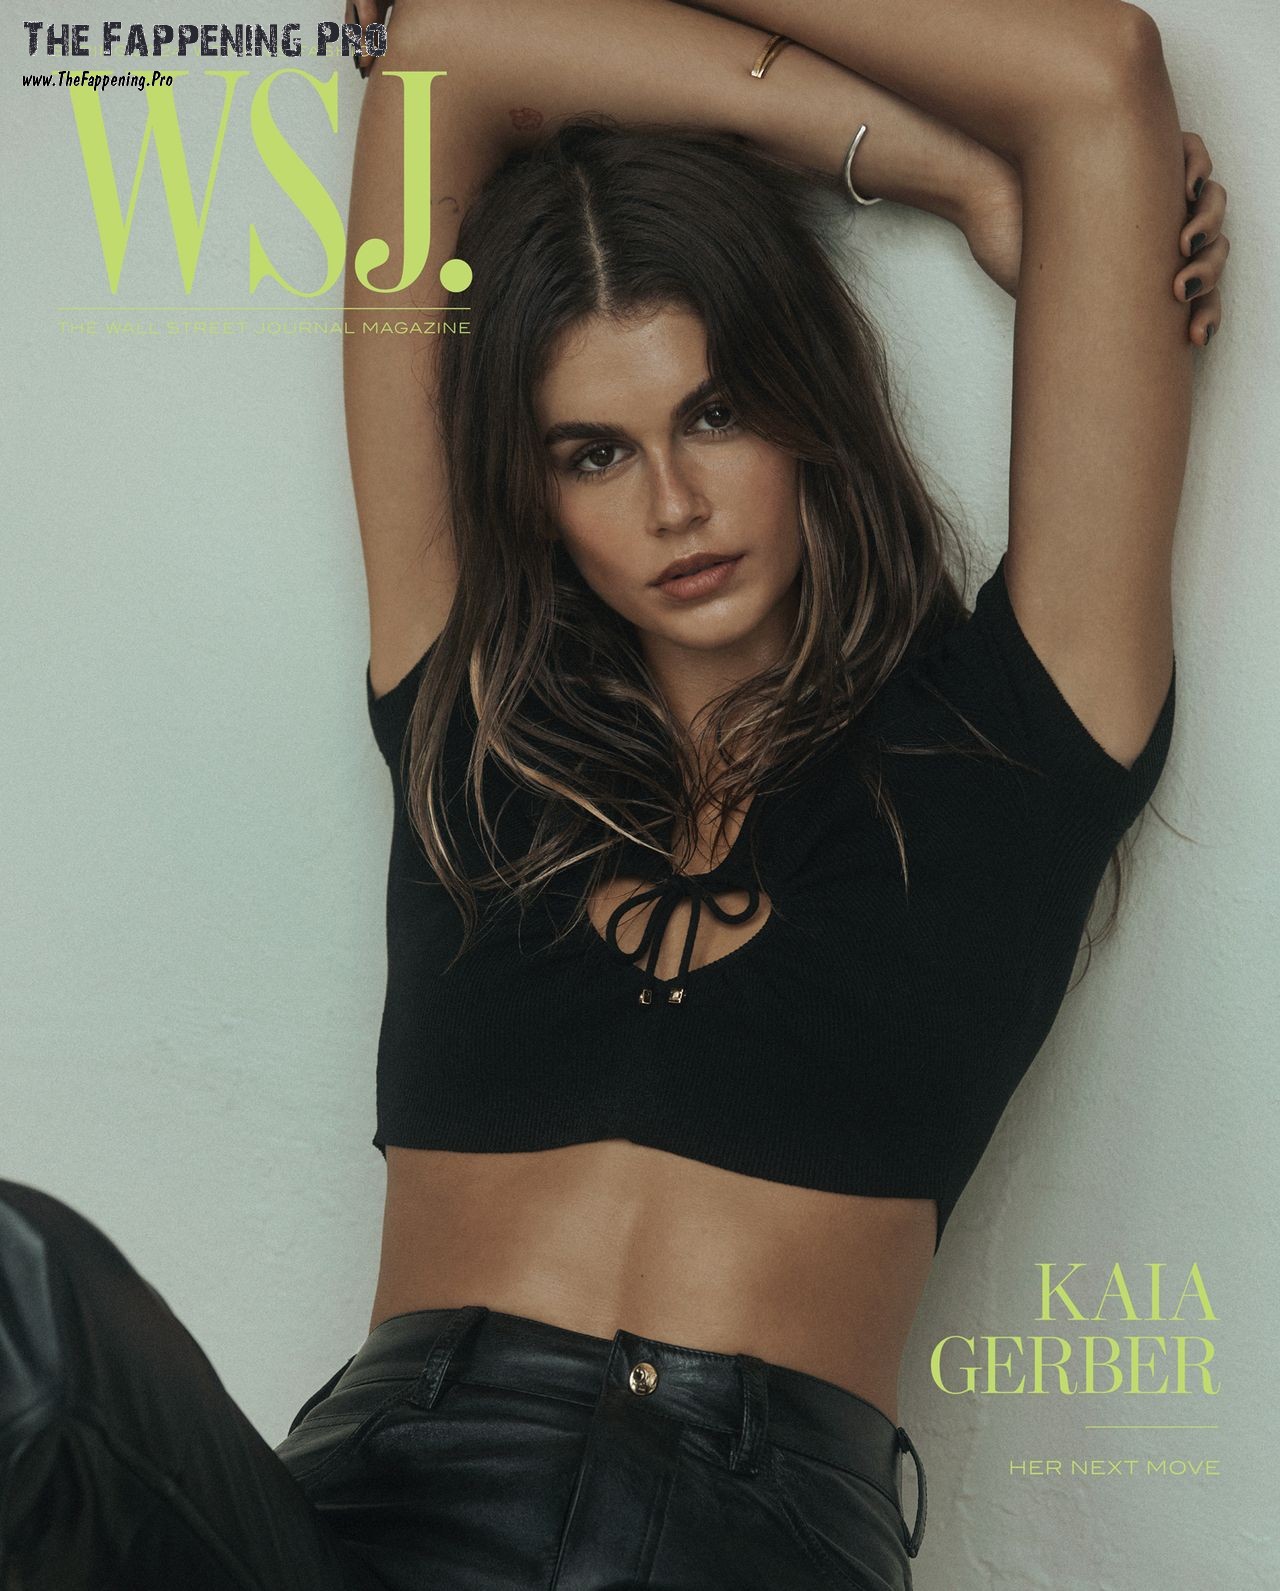 Experience the thrilling new photo shoot featuring the young and stunning Kaia Gerber as she graces the pages of WSJ Magazine Spring 2024. Following in her mother's footsteps, this 22-year-old beauty is already making waves in the modeling world. With revealing outfits and rugged leather boots, Kaia showcases her bold and edgy style. Don't miss her daring see-through top and topless photo at the entrance of a roadside motel. Kaia Gerber is definitely a rising star to keep an eye on in the fashion industry.